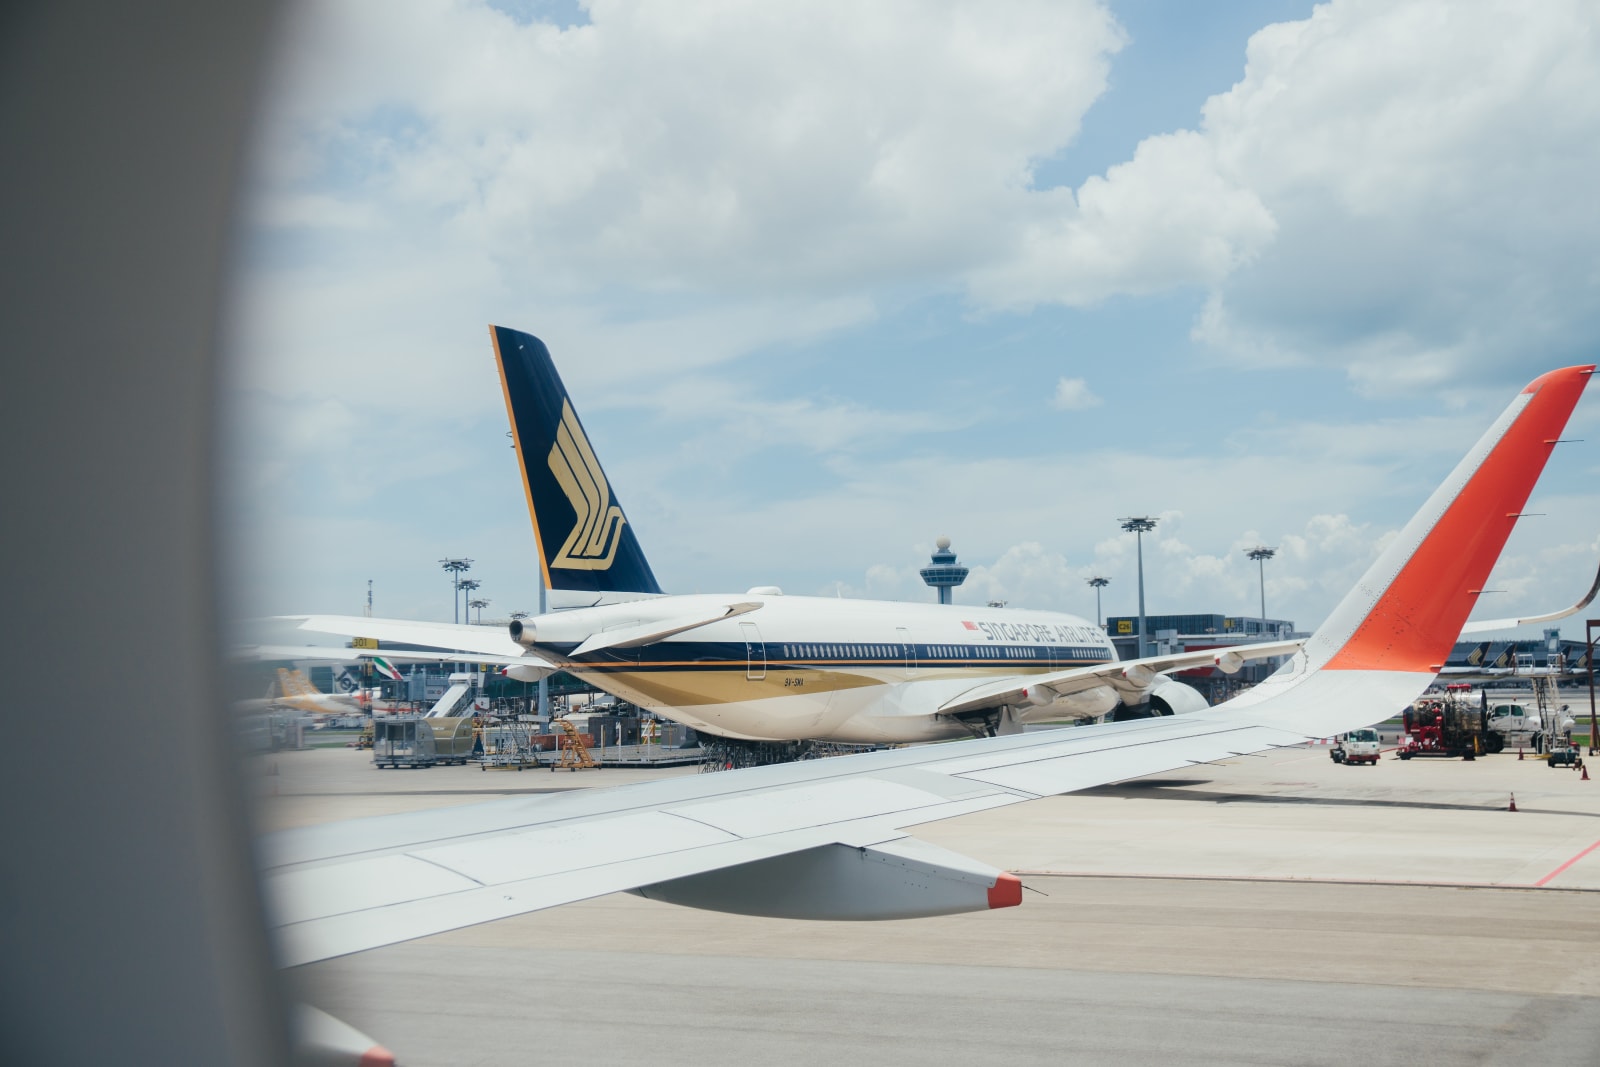 singapore airlines plane on runway